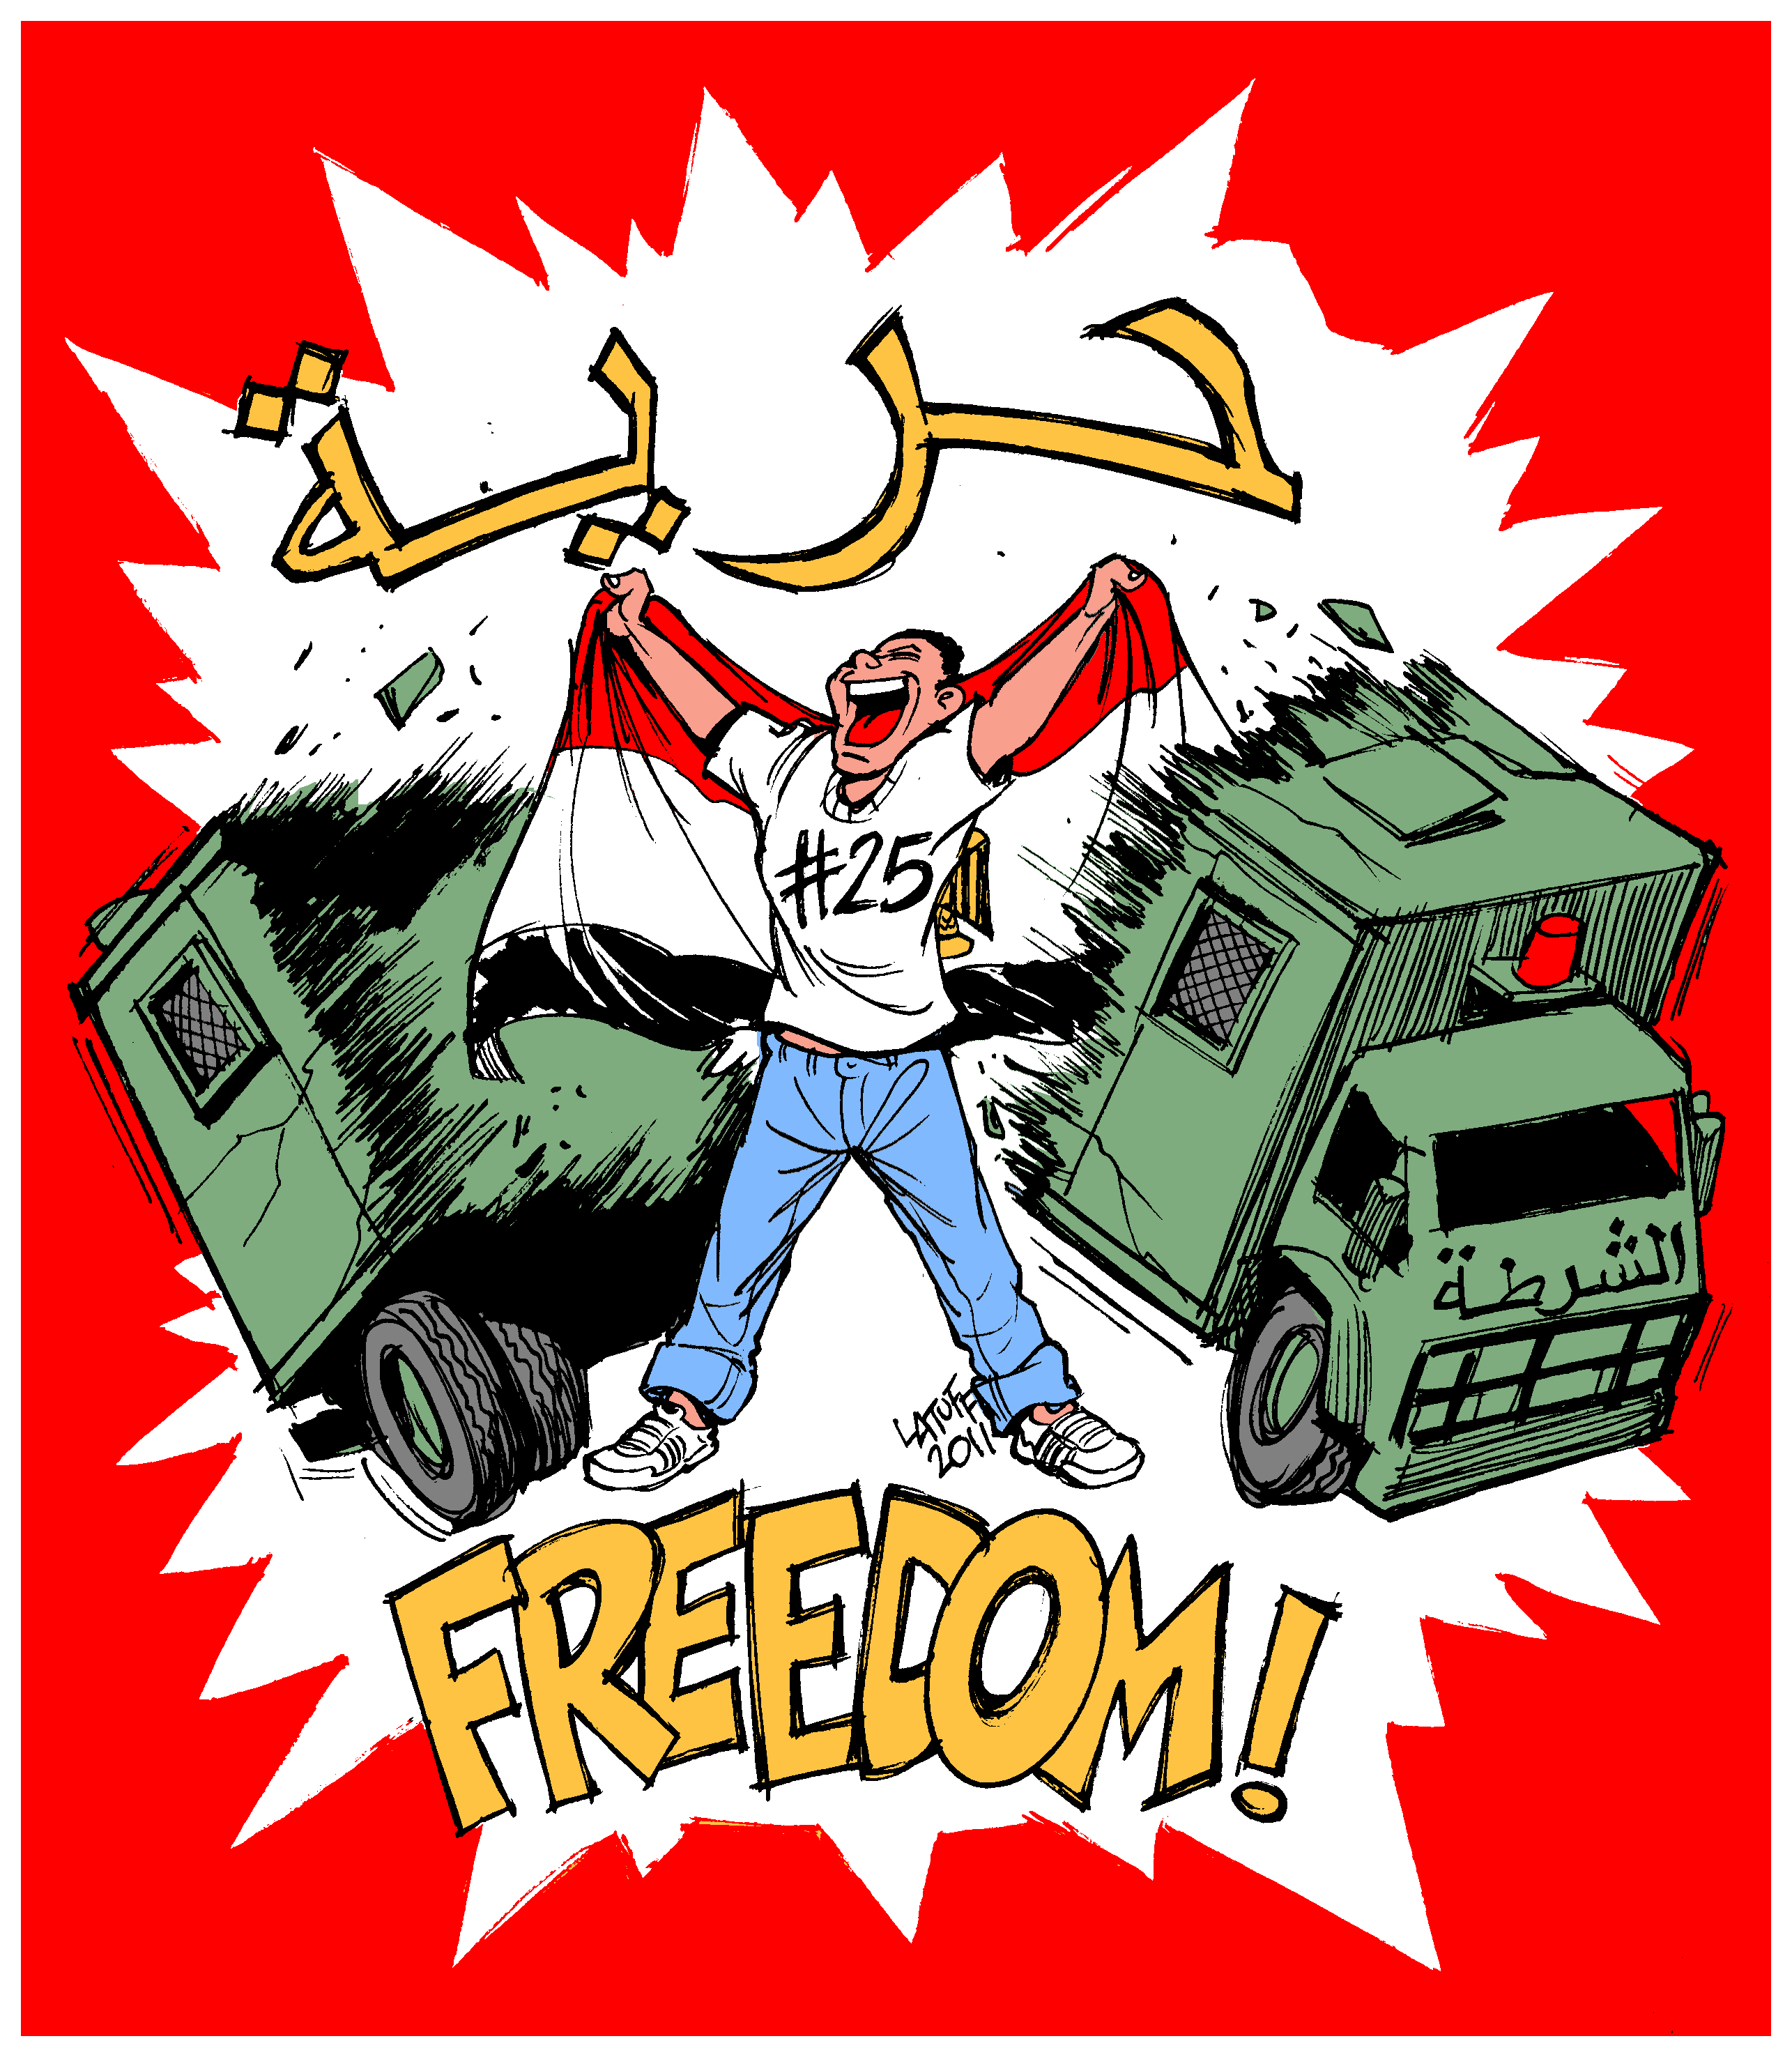 Egypt: Fighting for Freedom